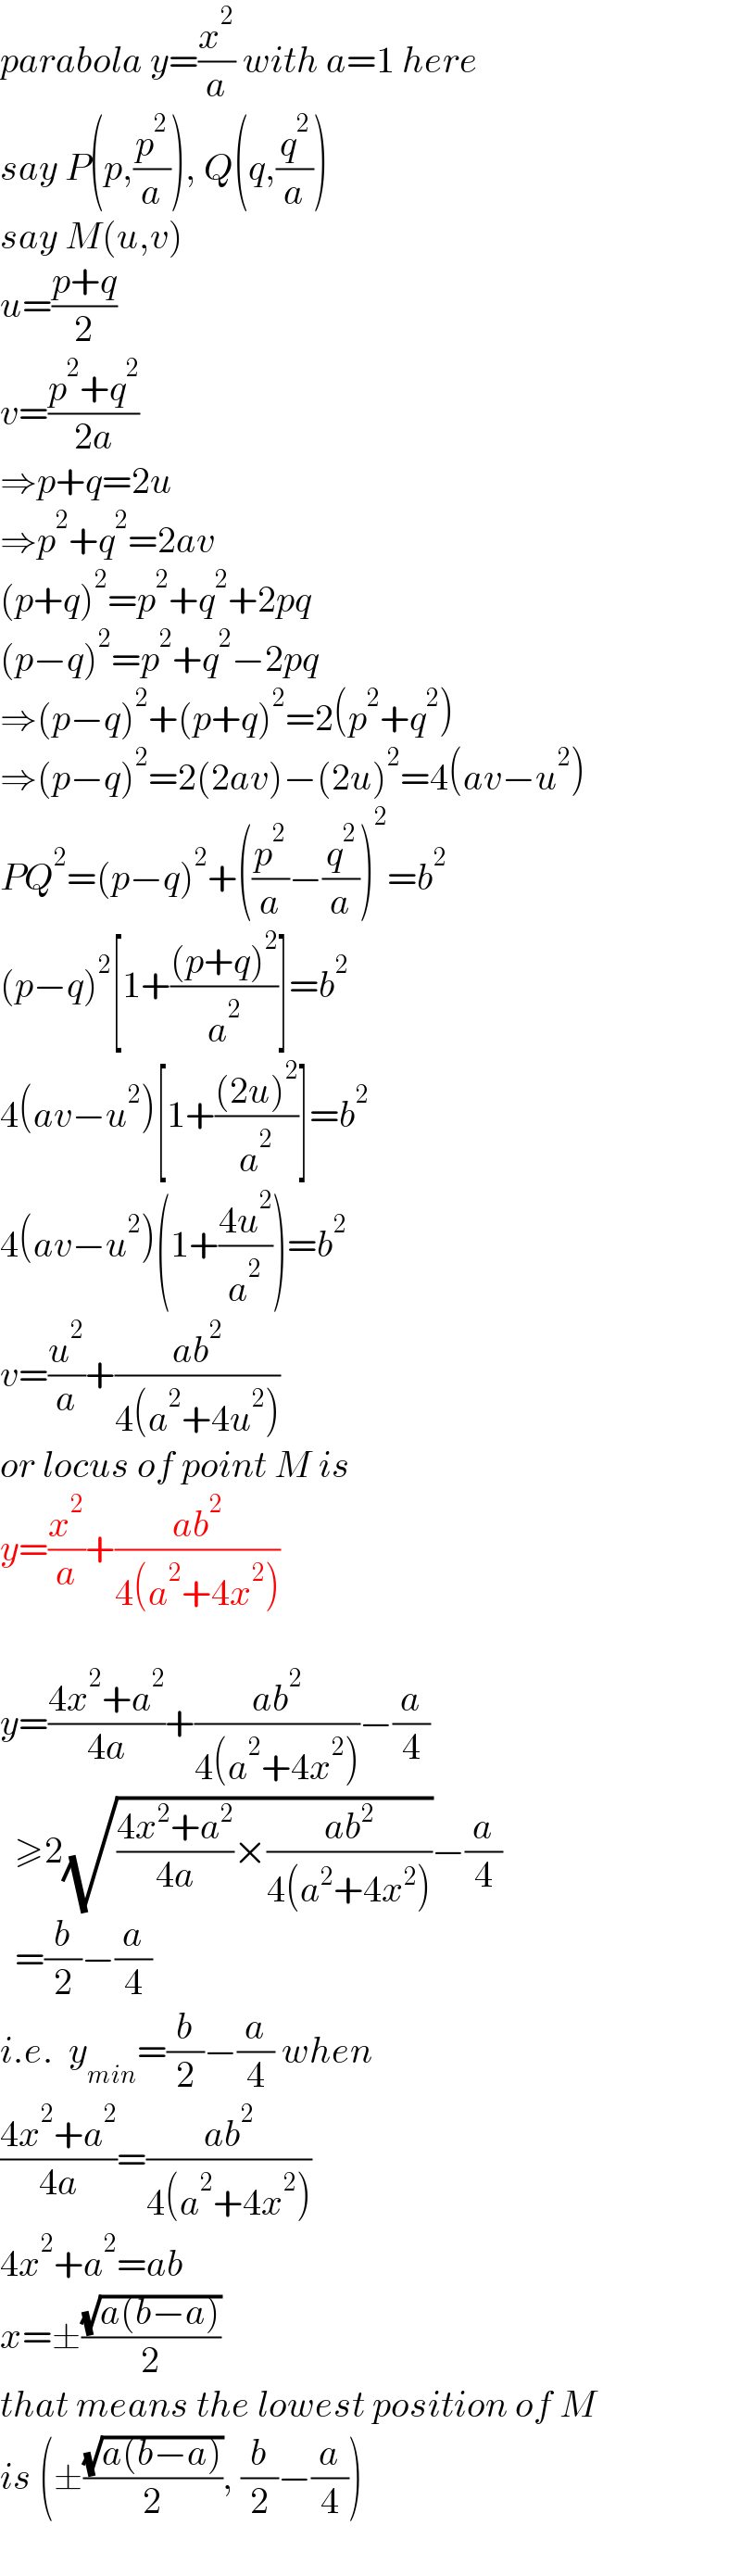 parabola y=(x^2 /a) with a=1 here  say P(p,(p^2 /a)), Q(q,(q^2 /a))  say M(u,v)  u=((p+q)/2)  v=((p^2 +q^2 )/(2a))  ⇒p+q=2u  ⇒p^2 +q^2 =2av  (p+q)^2 =p^2 +q^2 +2pq  (p−q)^2 =p^2 +q^2 −2pq  ⇒(p−q)^2 +(p+q)^2 =2(p^2 +q^2 )  ⇒(p−q)^2 =2(2av)−(2u)^2 =4(av−u^2 )  PQ^2 =(p−q)^2 +((p^2 /a)−(q^2 /a))^2 =b^2   (p−q)^2 [1+(((p+q)^2 )/a^2 )]=b^2   4(av−u^2 )[1+(((2u)^2 )/a^2 )]=b^2   4(av−u^2 )(1+((4u^2 )/a^2 ))=b^2   v=(u^2 /a)+((ab^2 )/(4(a^2 +4u^2 )))  or locus of point M is  y=(x^2 /a)+((ab^2 )/(4(a^2 +4x^2 )))    y=((4x^2 +a^2 )/(4a))+((ab^2 )/(4(a^2 +4x^2 )))−(a/4)    ≥2(√(((4x^2 +a^2 )/(4a))×((ab^2 )/(4(a^2 +4x^2 )))))−(a/4)    =(b/2)−(a/4)  i.e.  y_(min) =(b/2)−(a/4) when  ((4x^2 +a^2 )/(4a))=((ab^2 )/(4(a^2 +4x^2 )))  4x^2 +a^2 =ab  x=±((√(a(b−a)))/2)  that means the lowest position of M  is (±((√(a(b−a)))/2), (b/2)−(a/4))  